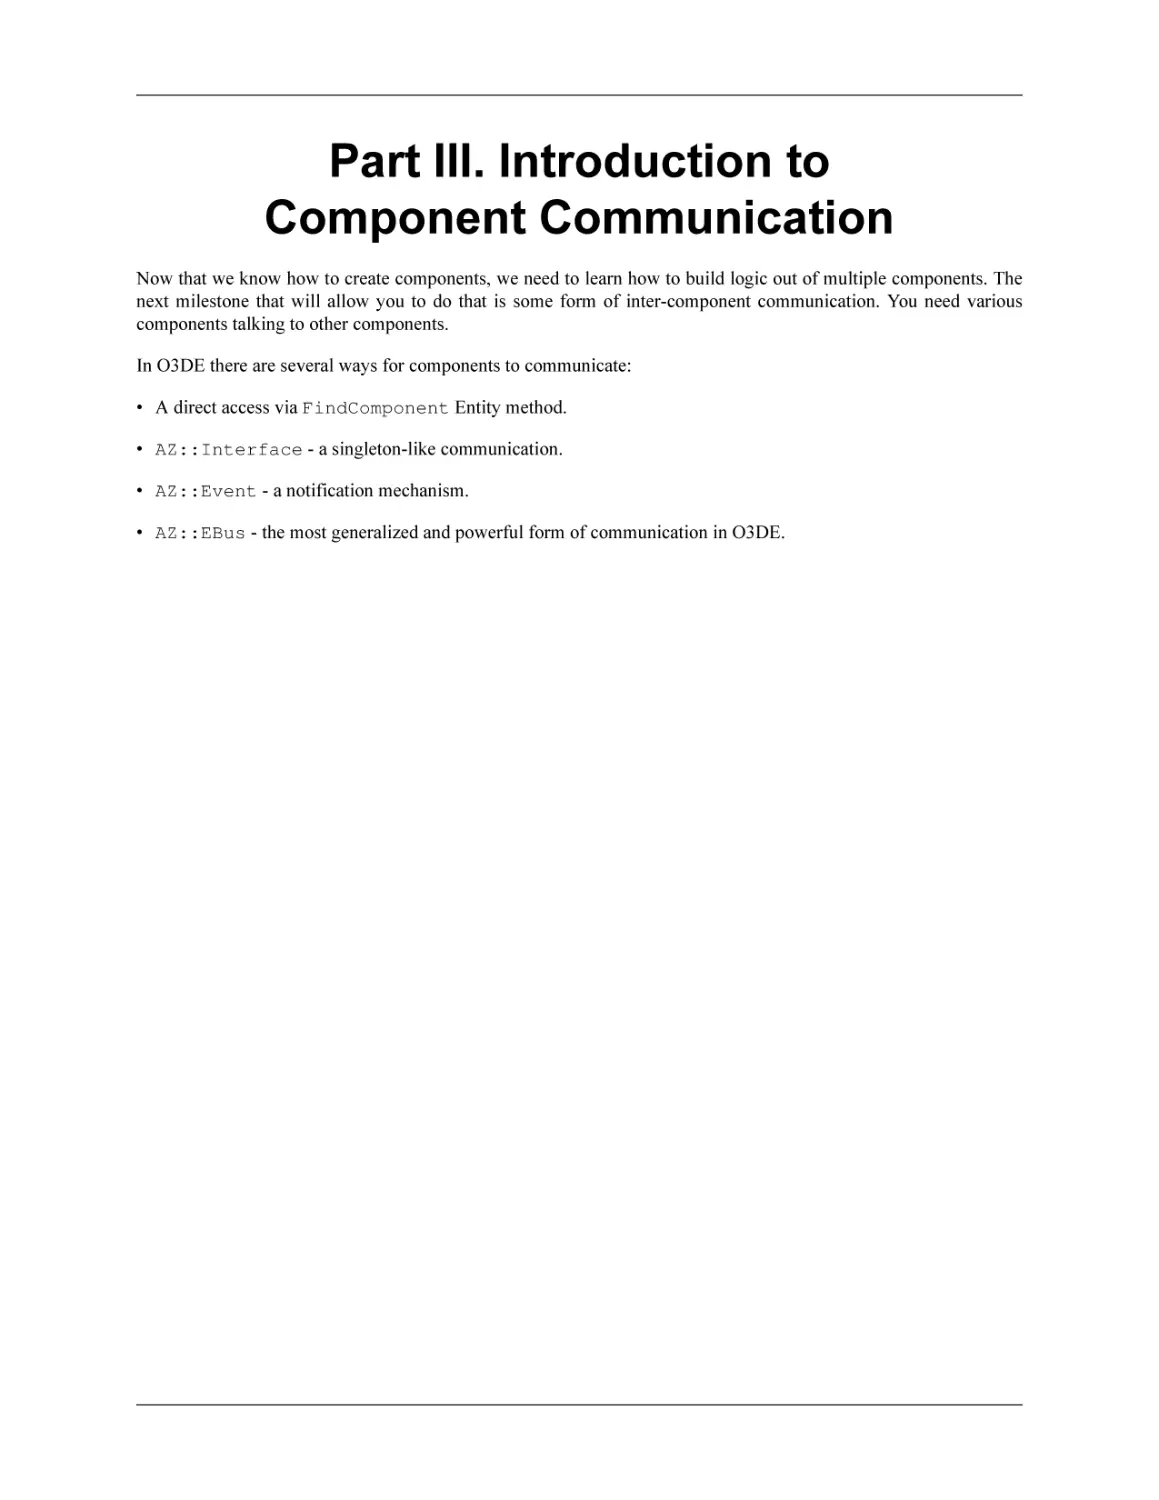 Part III. Introduction to Component Communication